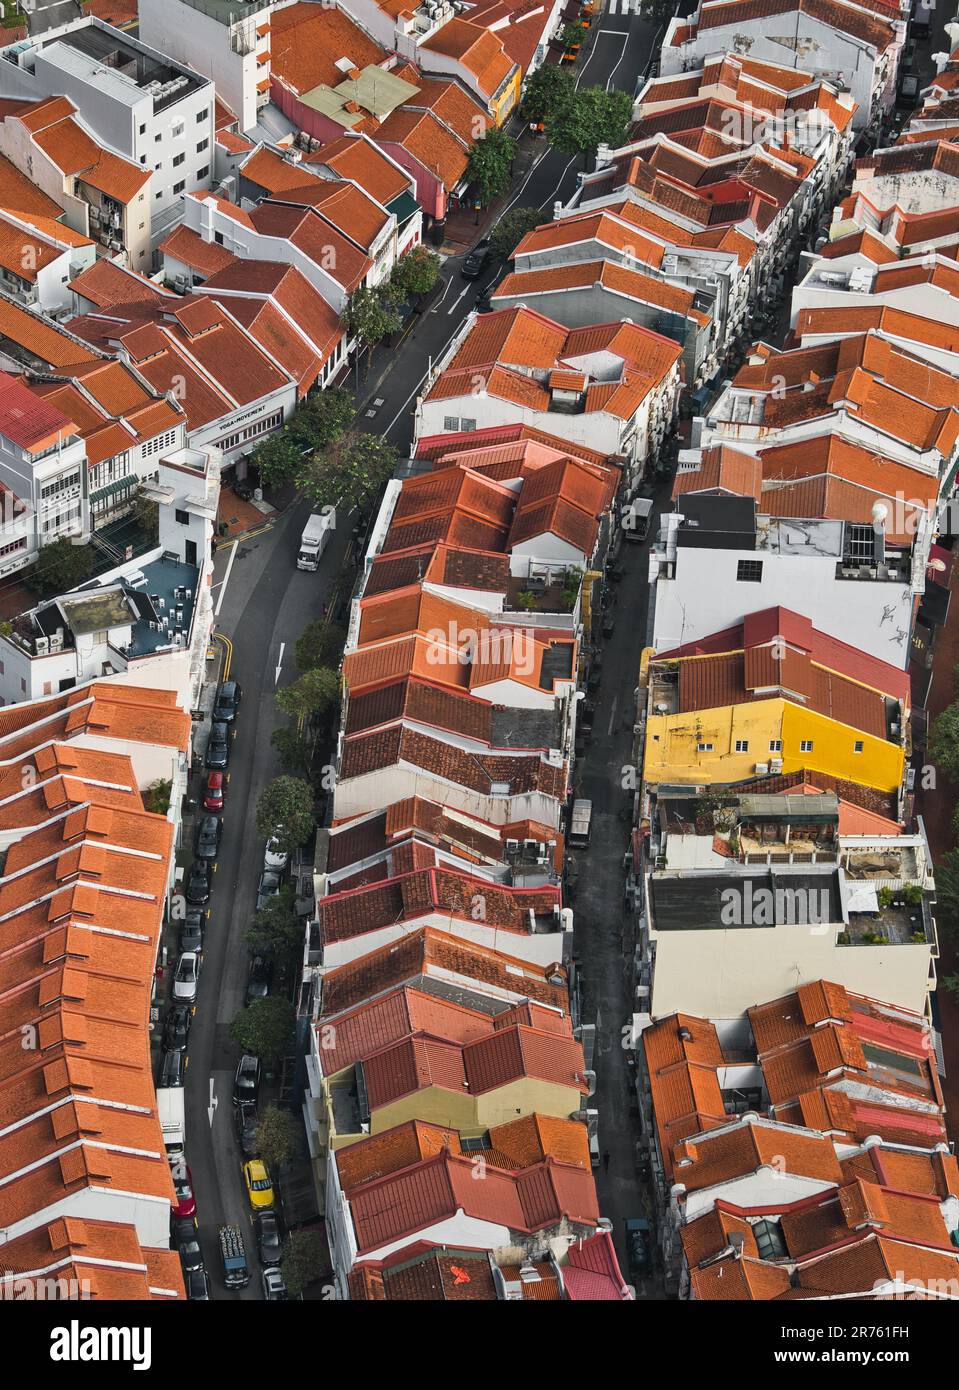 An areal view of a vibrant cityscape featuring red-tiled roofs and white-walled houses Stock Photo